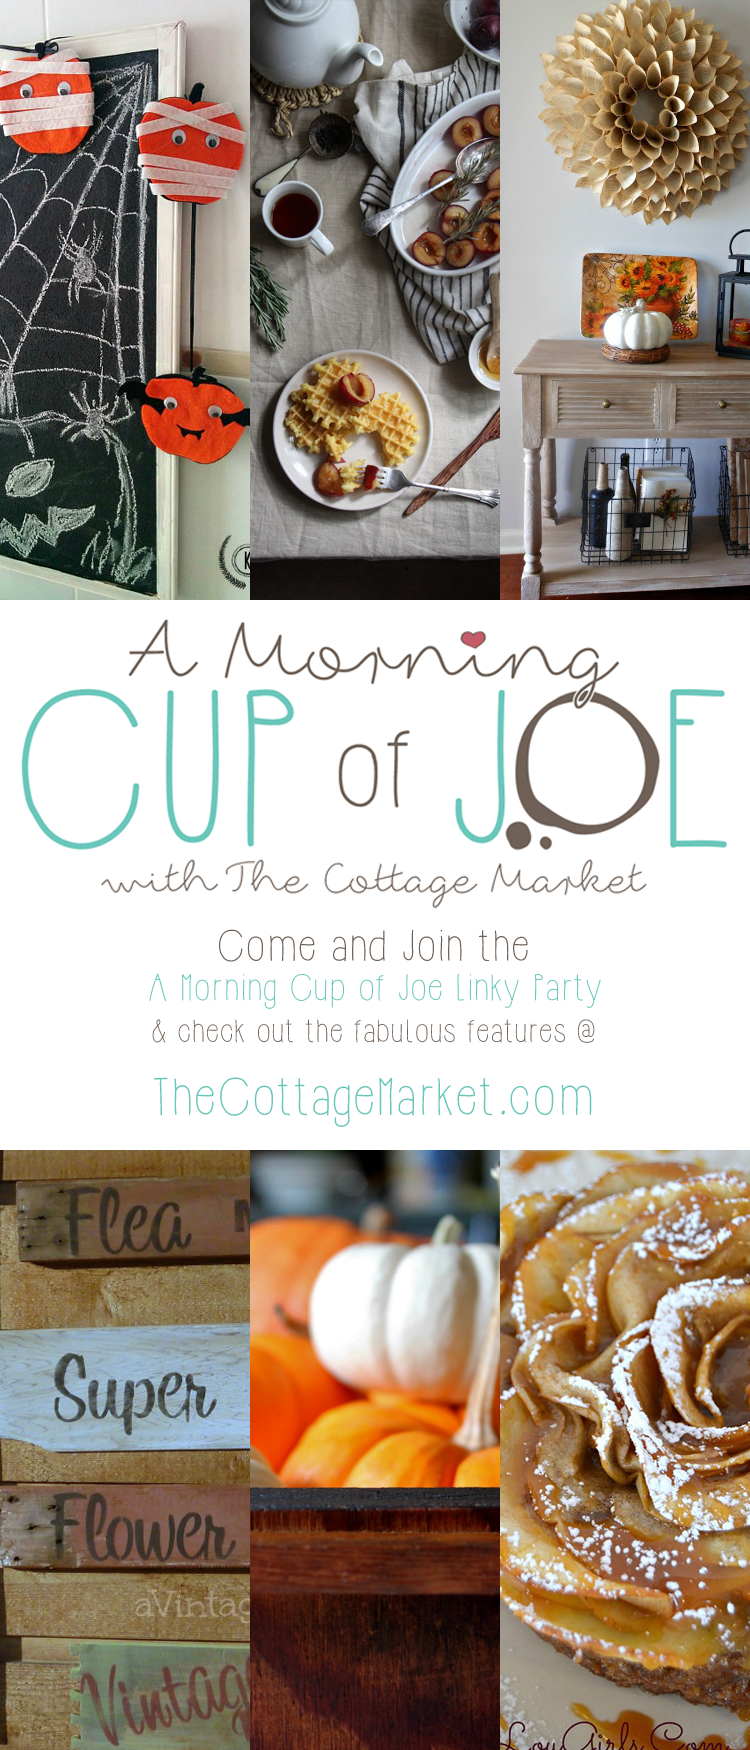 http://thecottagemarket.com/wp-content/uploads/2015/10/cuppa103015.png